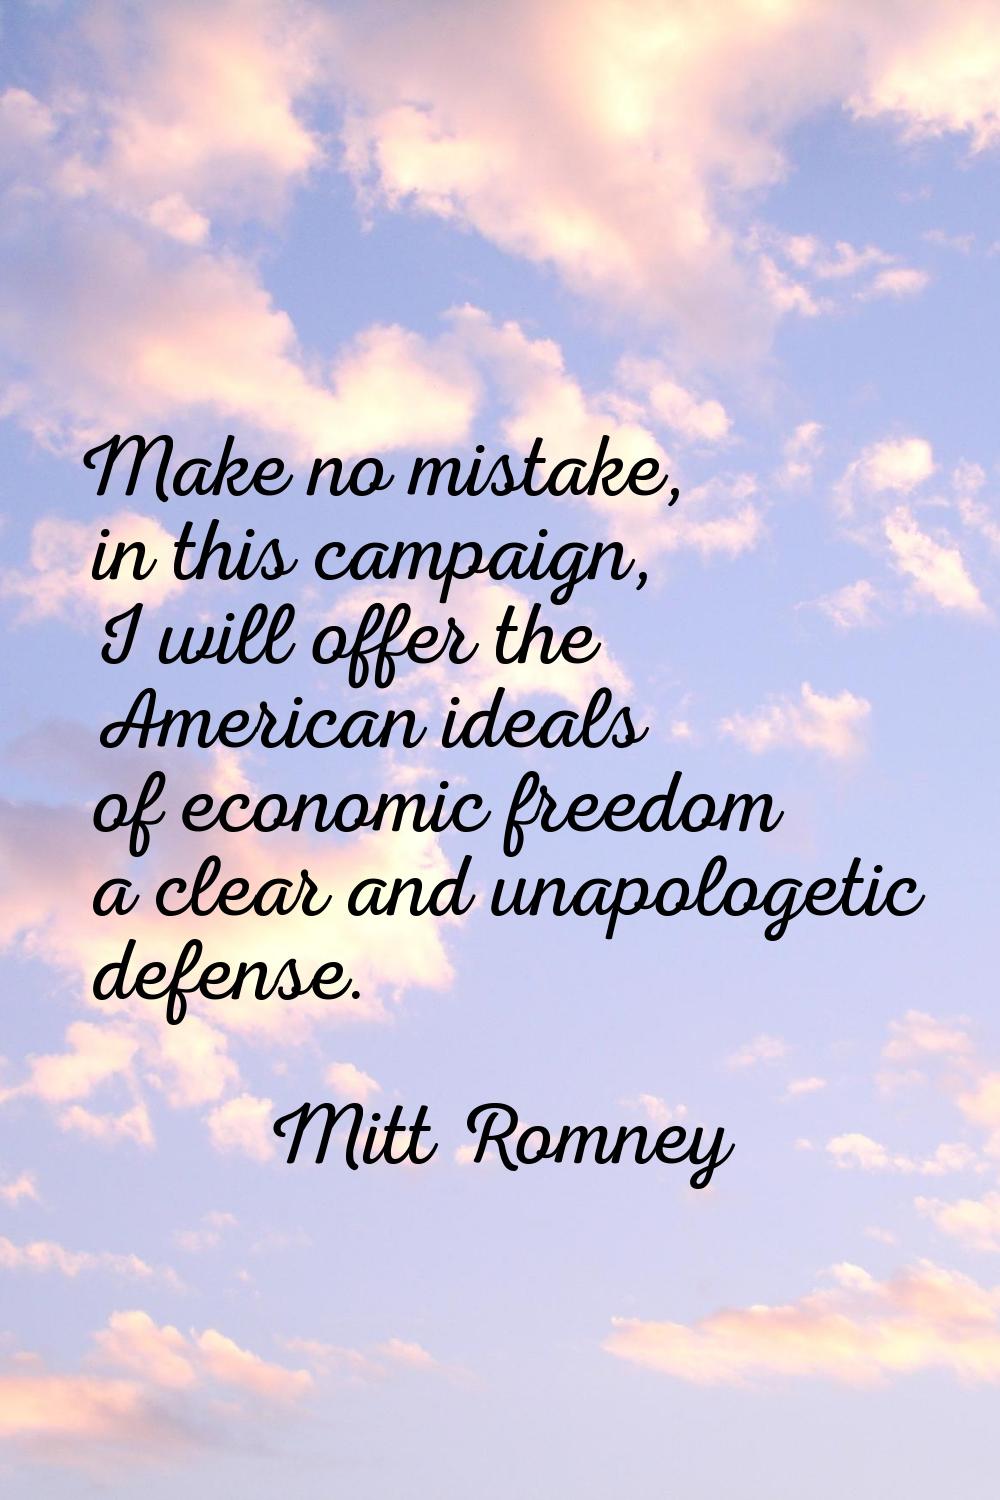 Make no mistake, in this campaign, I will offer the American ideals of economic freedom a clear and